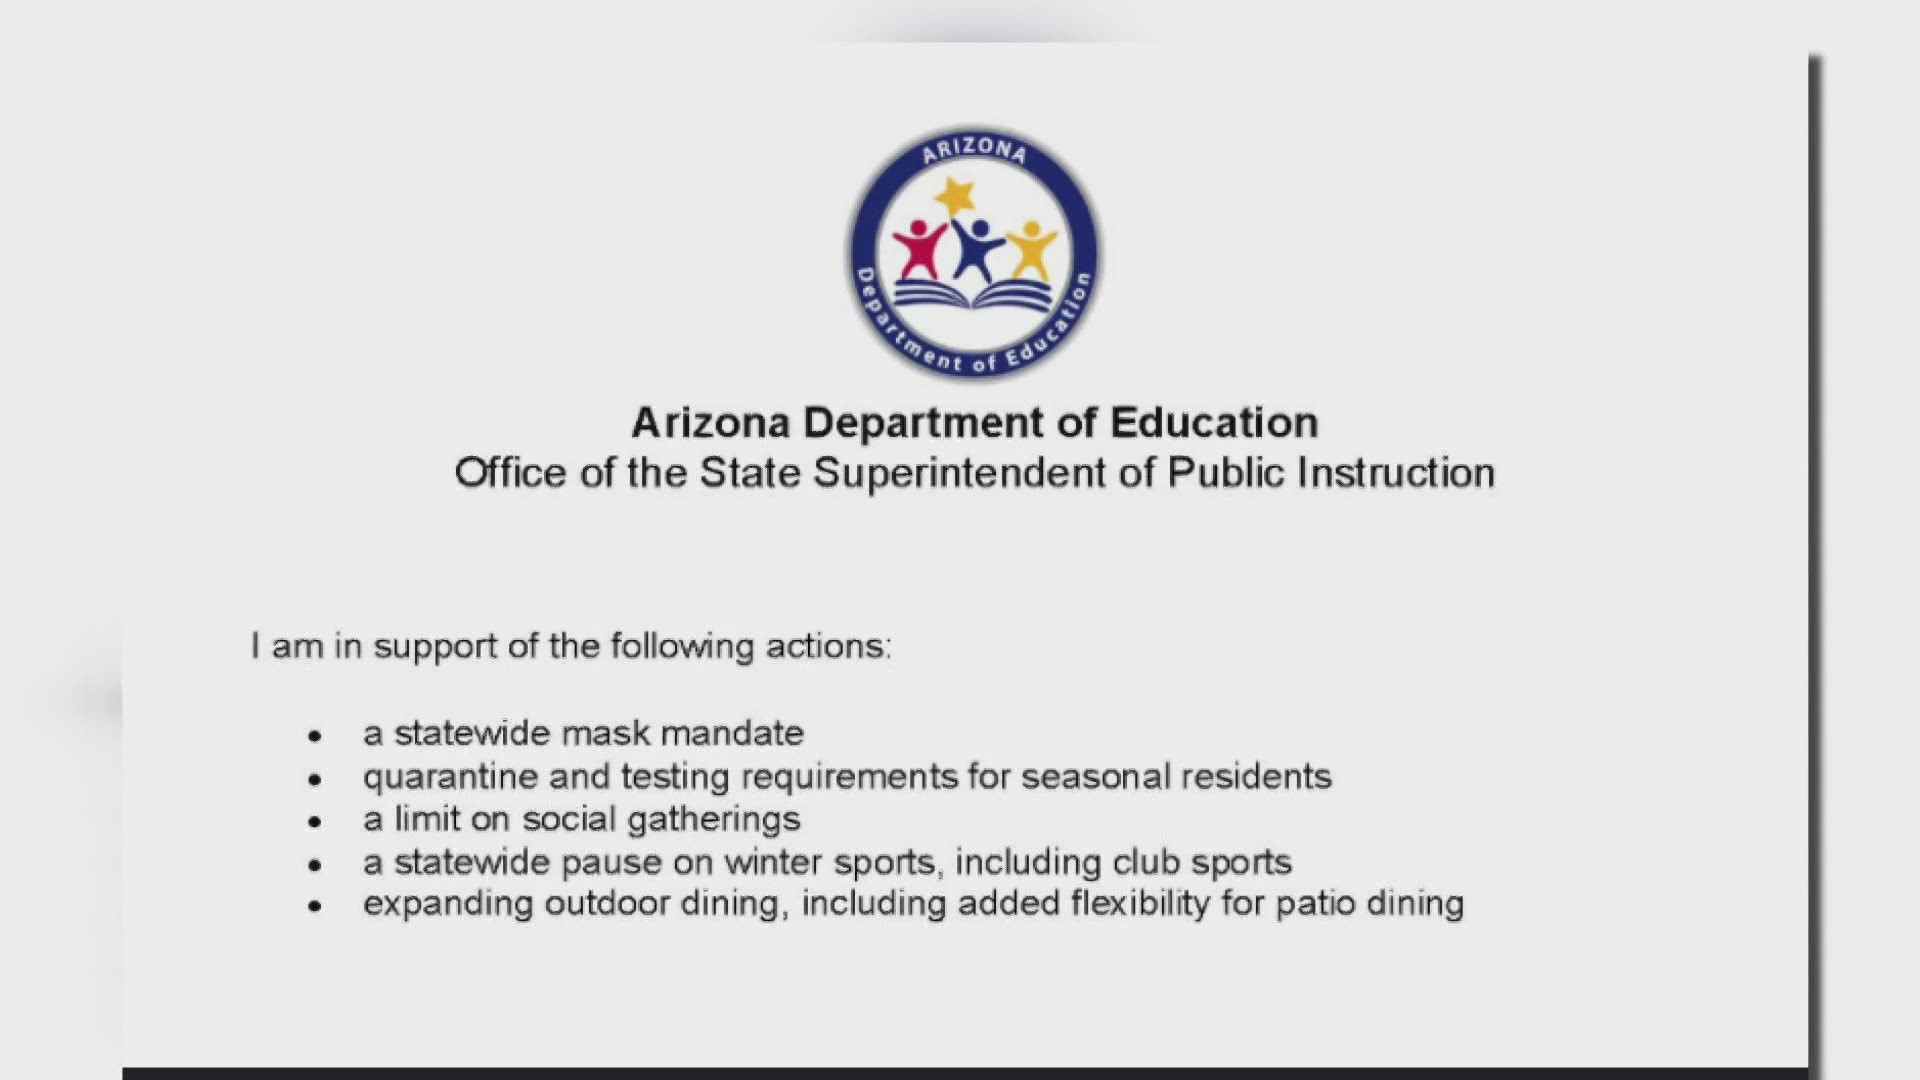 Arizona's education leader is calling for more COVID-19 safeguards ahead of the holidays and the next season of school sports. Team 12's Jen Wahl has the latest.